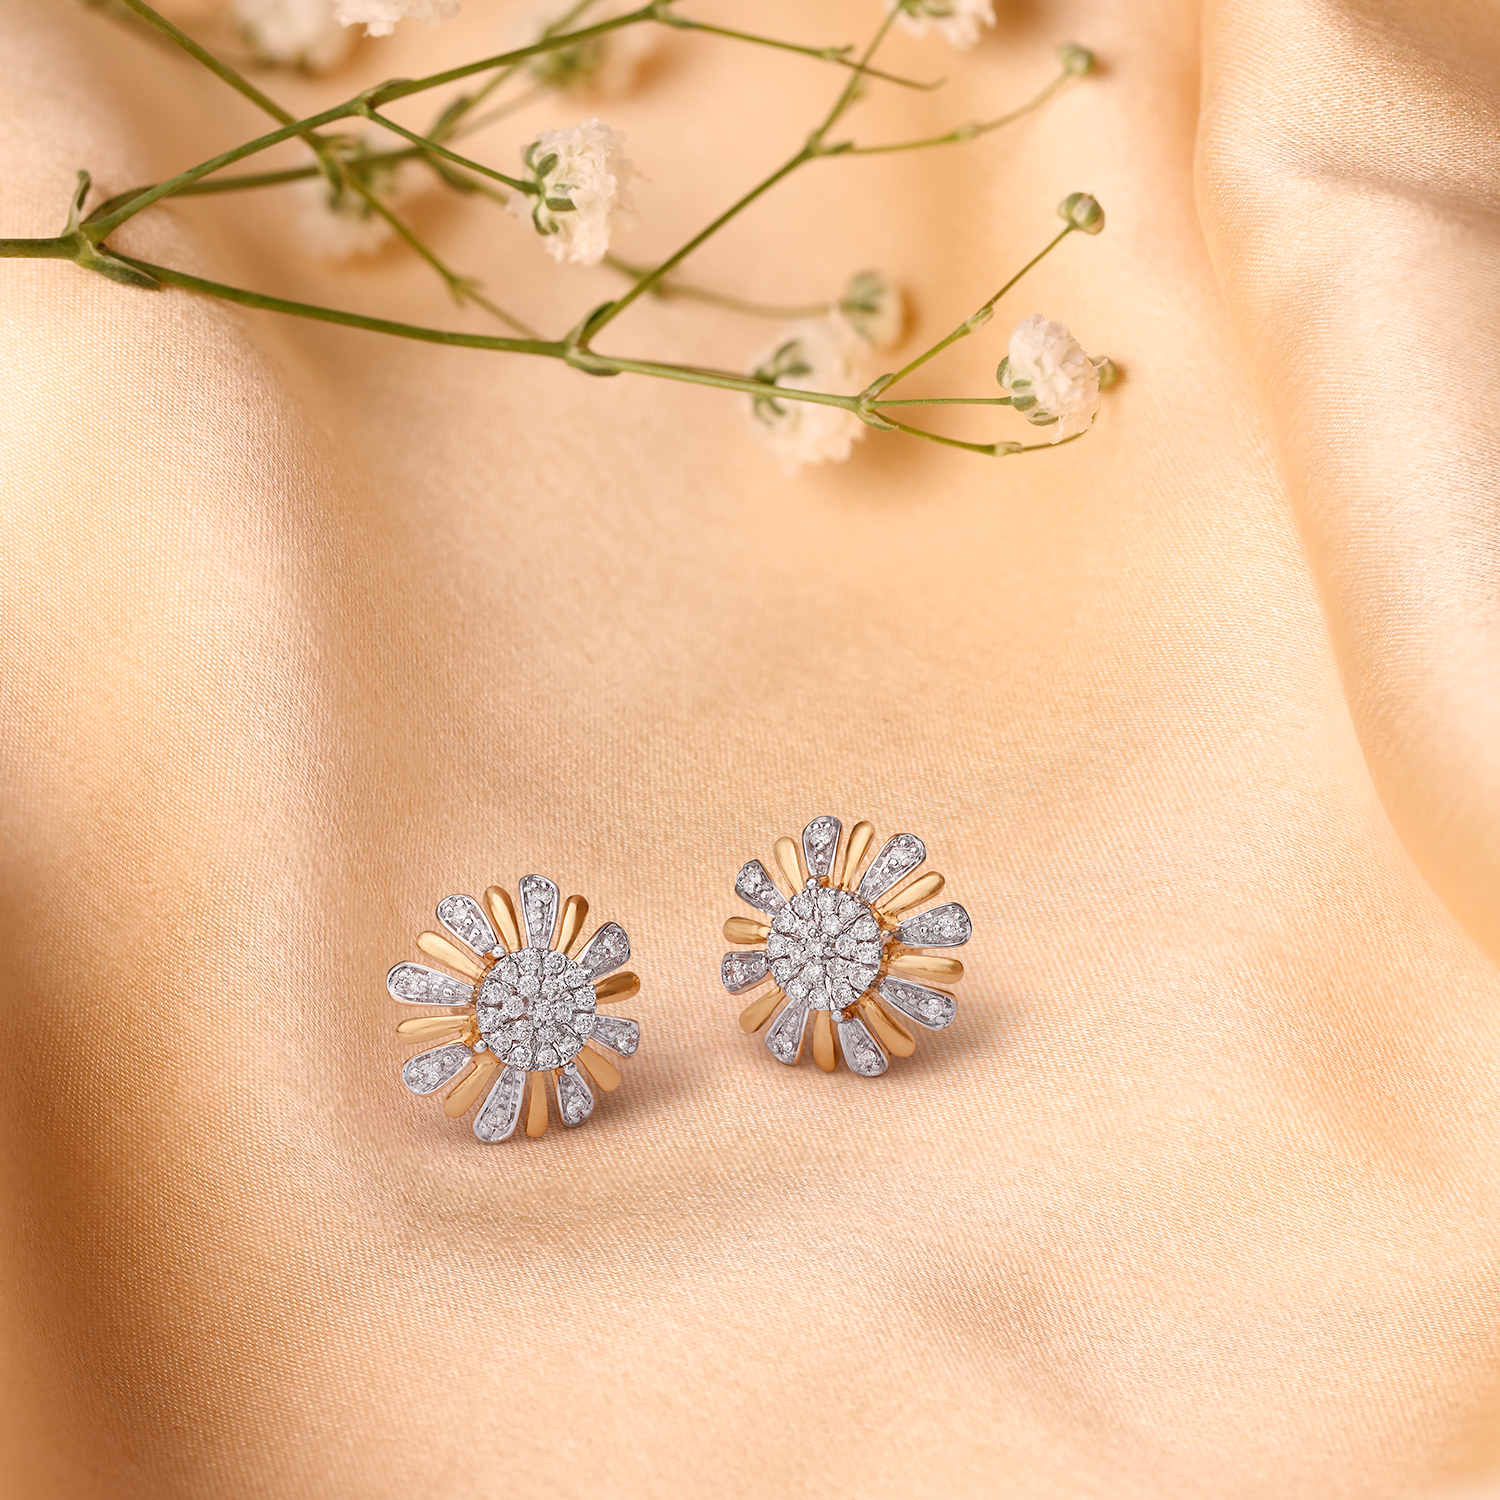 Diamond Jhumka and Earrings From Tanishq - South India Jewels-baongoctrading.com.vn